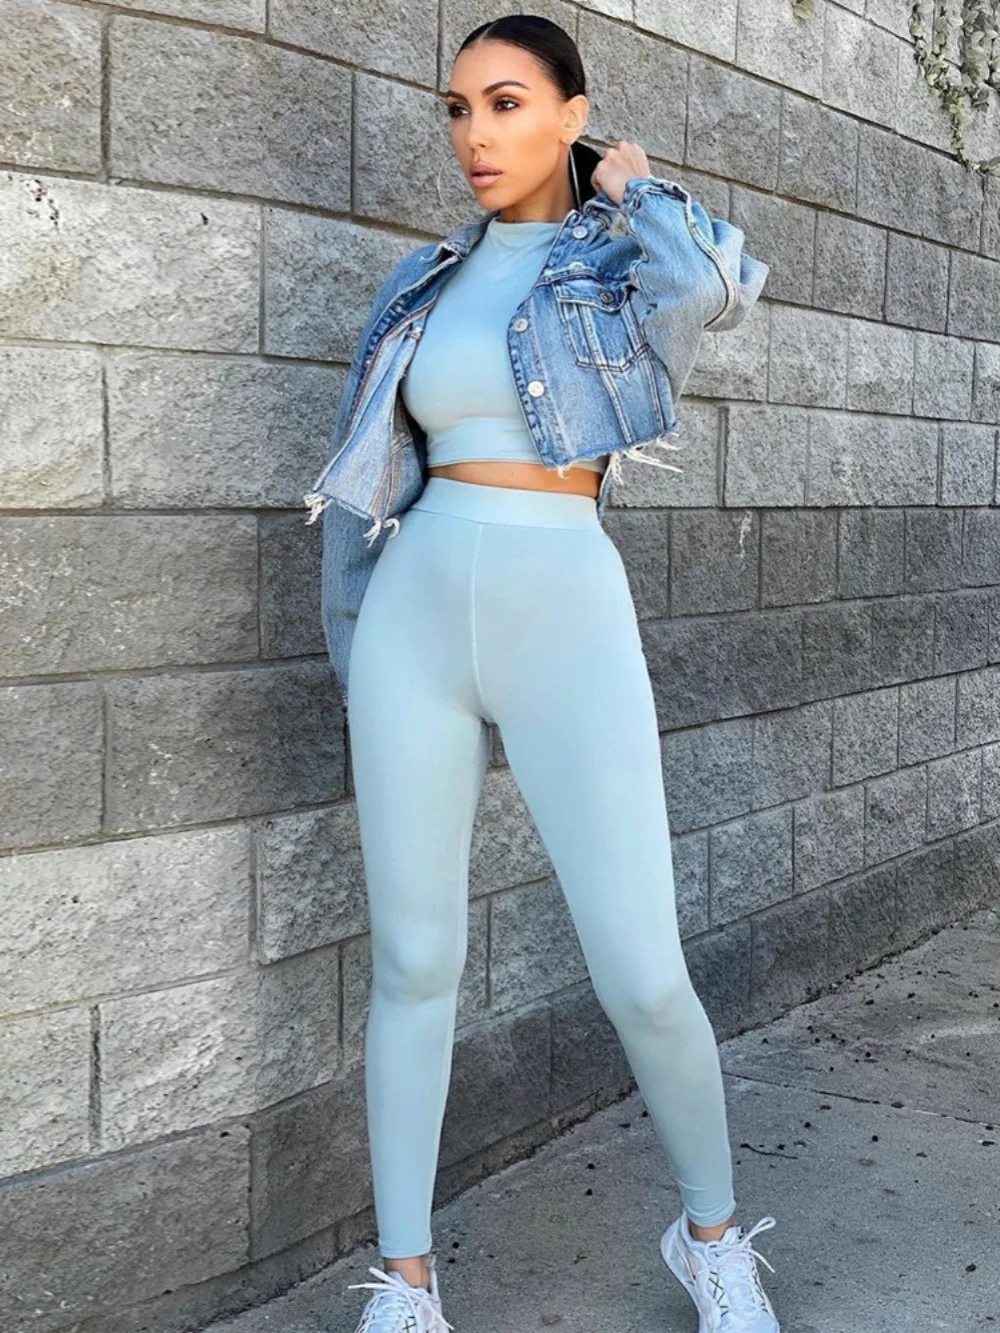 Two Piece Sets Women Solid Autumn Tracksuits High Waist Stretchy Sportswear Hot Crop Tops And Leggings Matching Outfits pink sweat suits